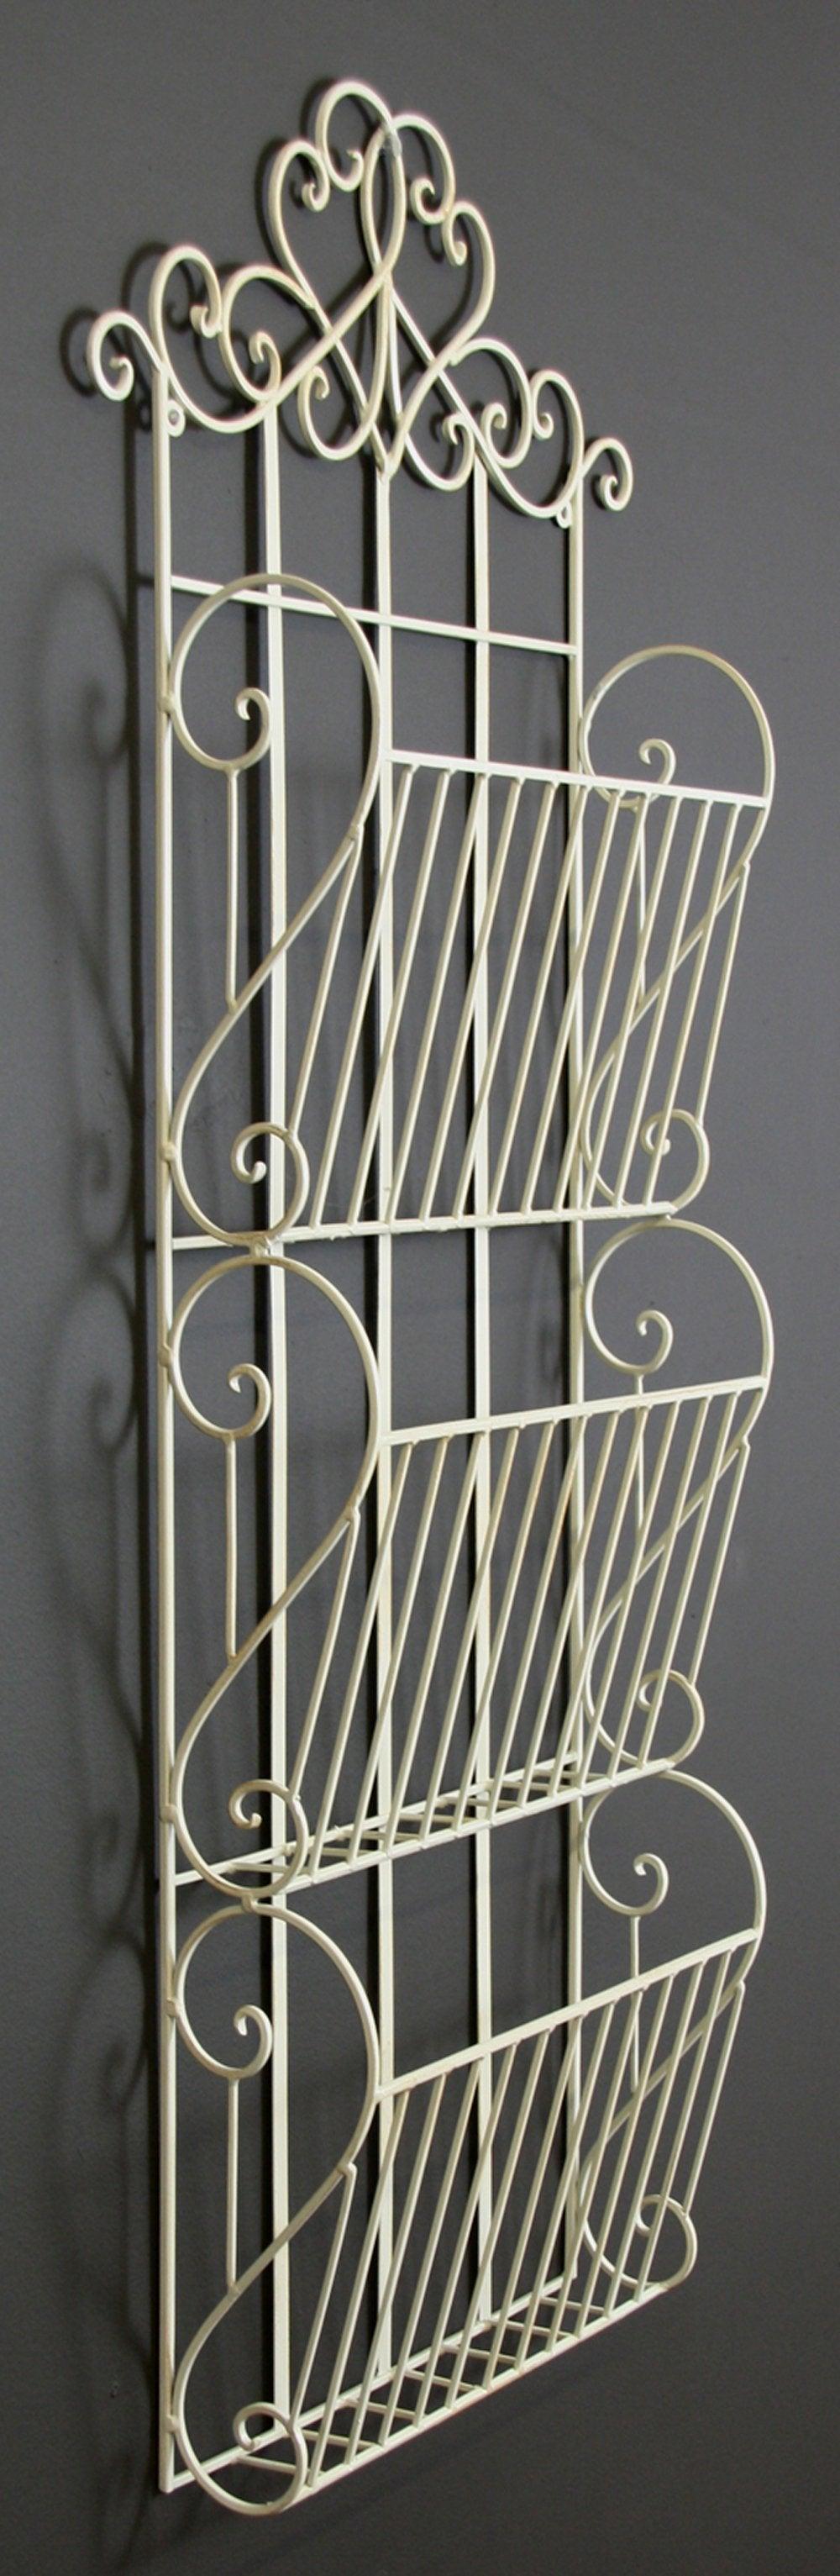 View Cream Scroll Wall Hanging 3 Section Magazine Rack information